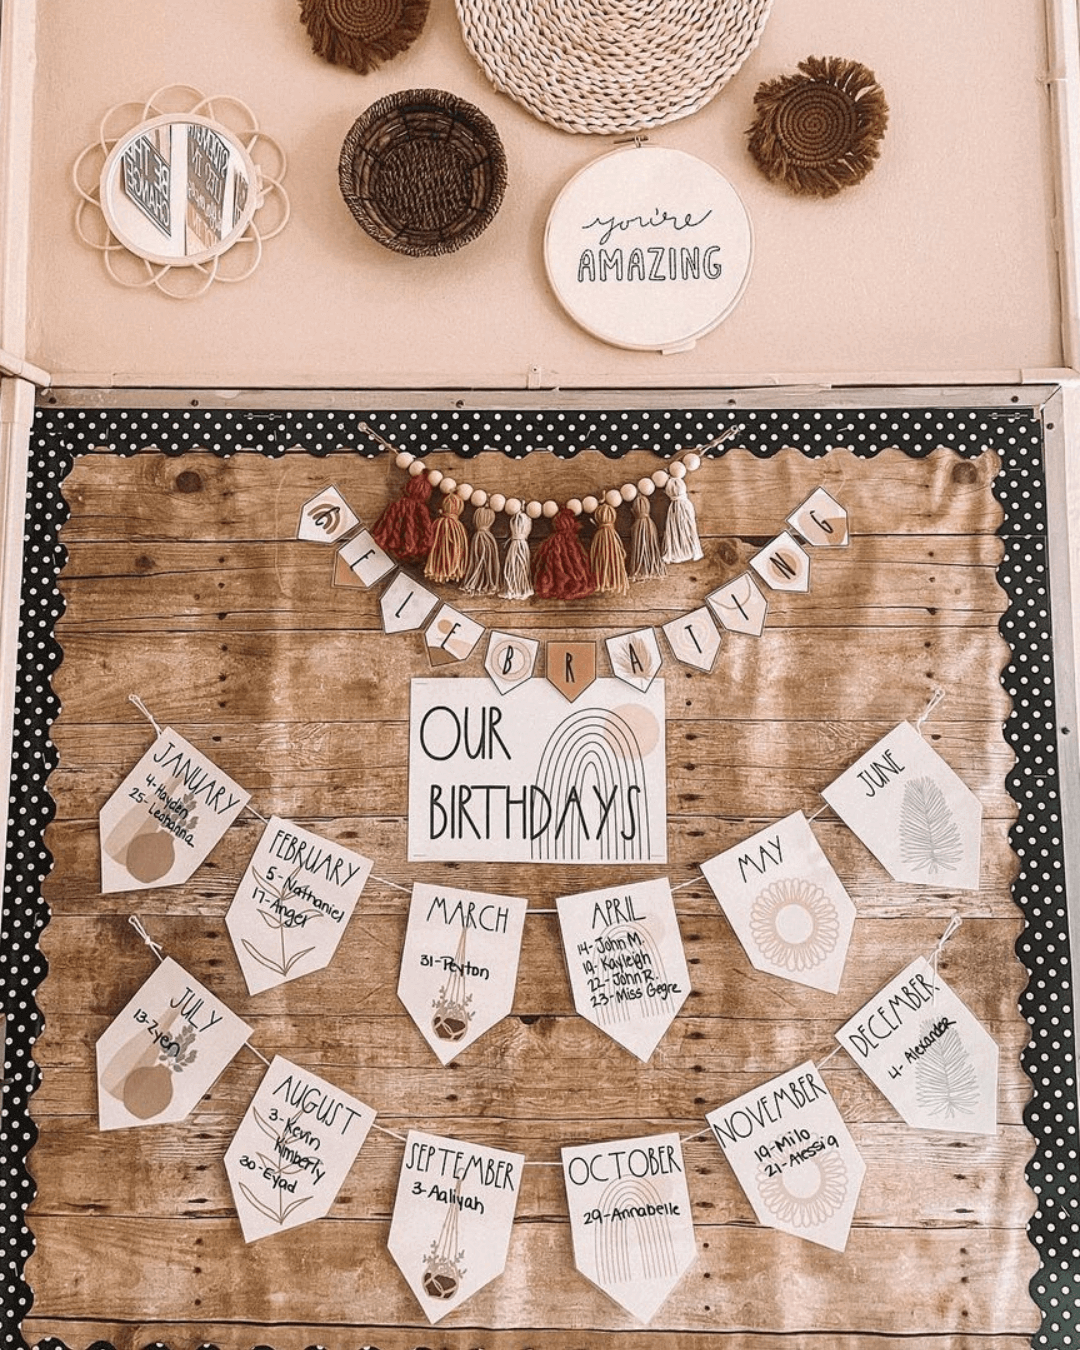 The left image shows a birthday display from the Boho Vibes range. It’s the months of the year in a bunting formation, pinned to a timber looking backing paper. The right image shows a wicker mirror with affirmation stickers affixed.” style=